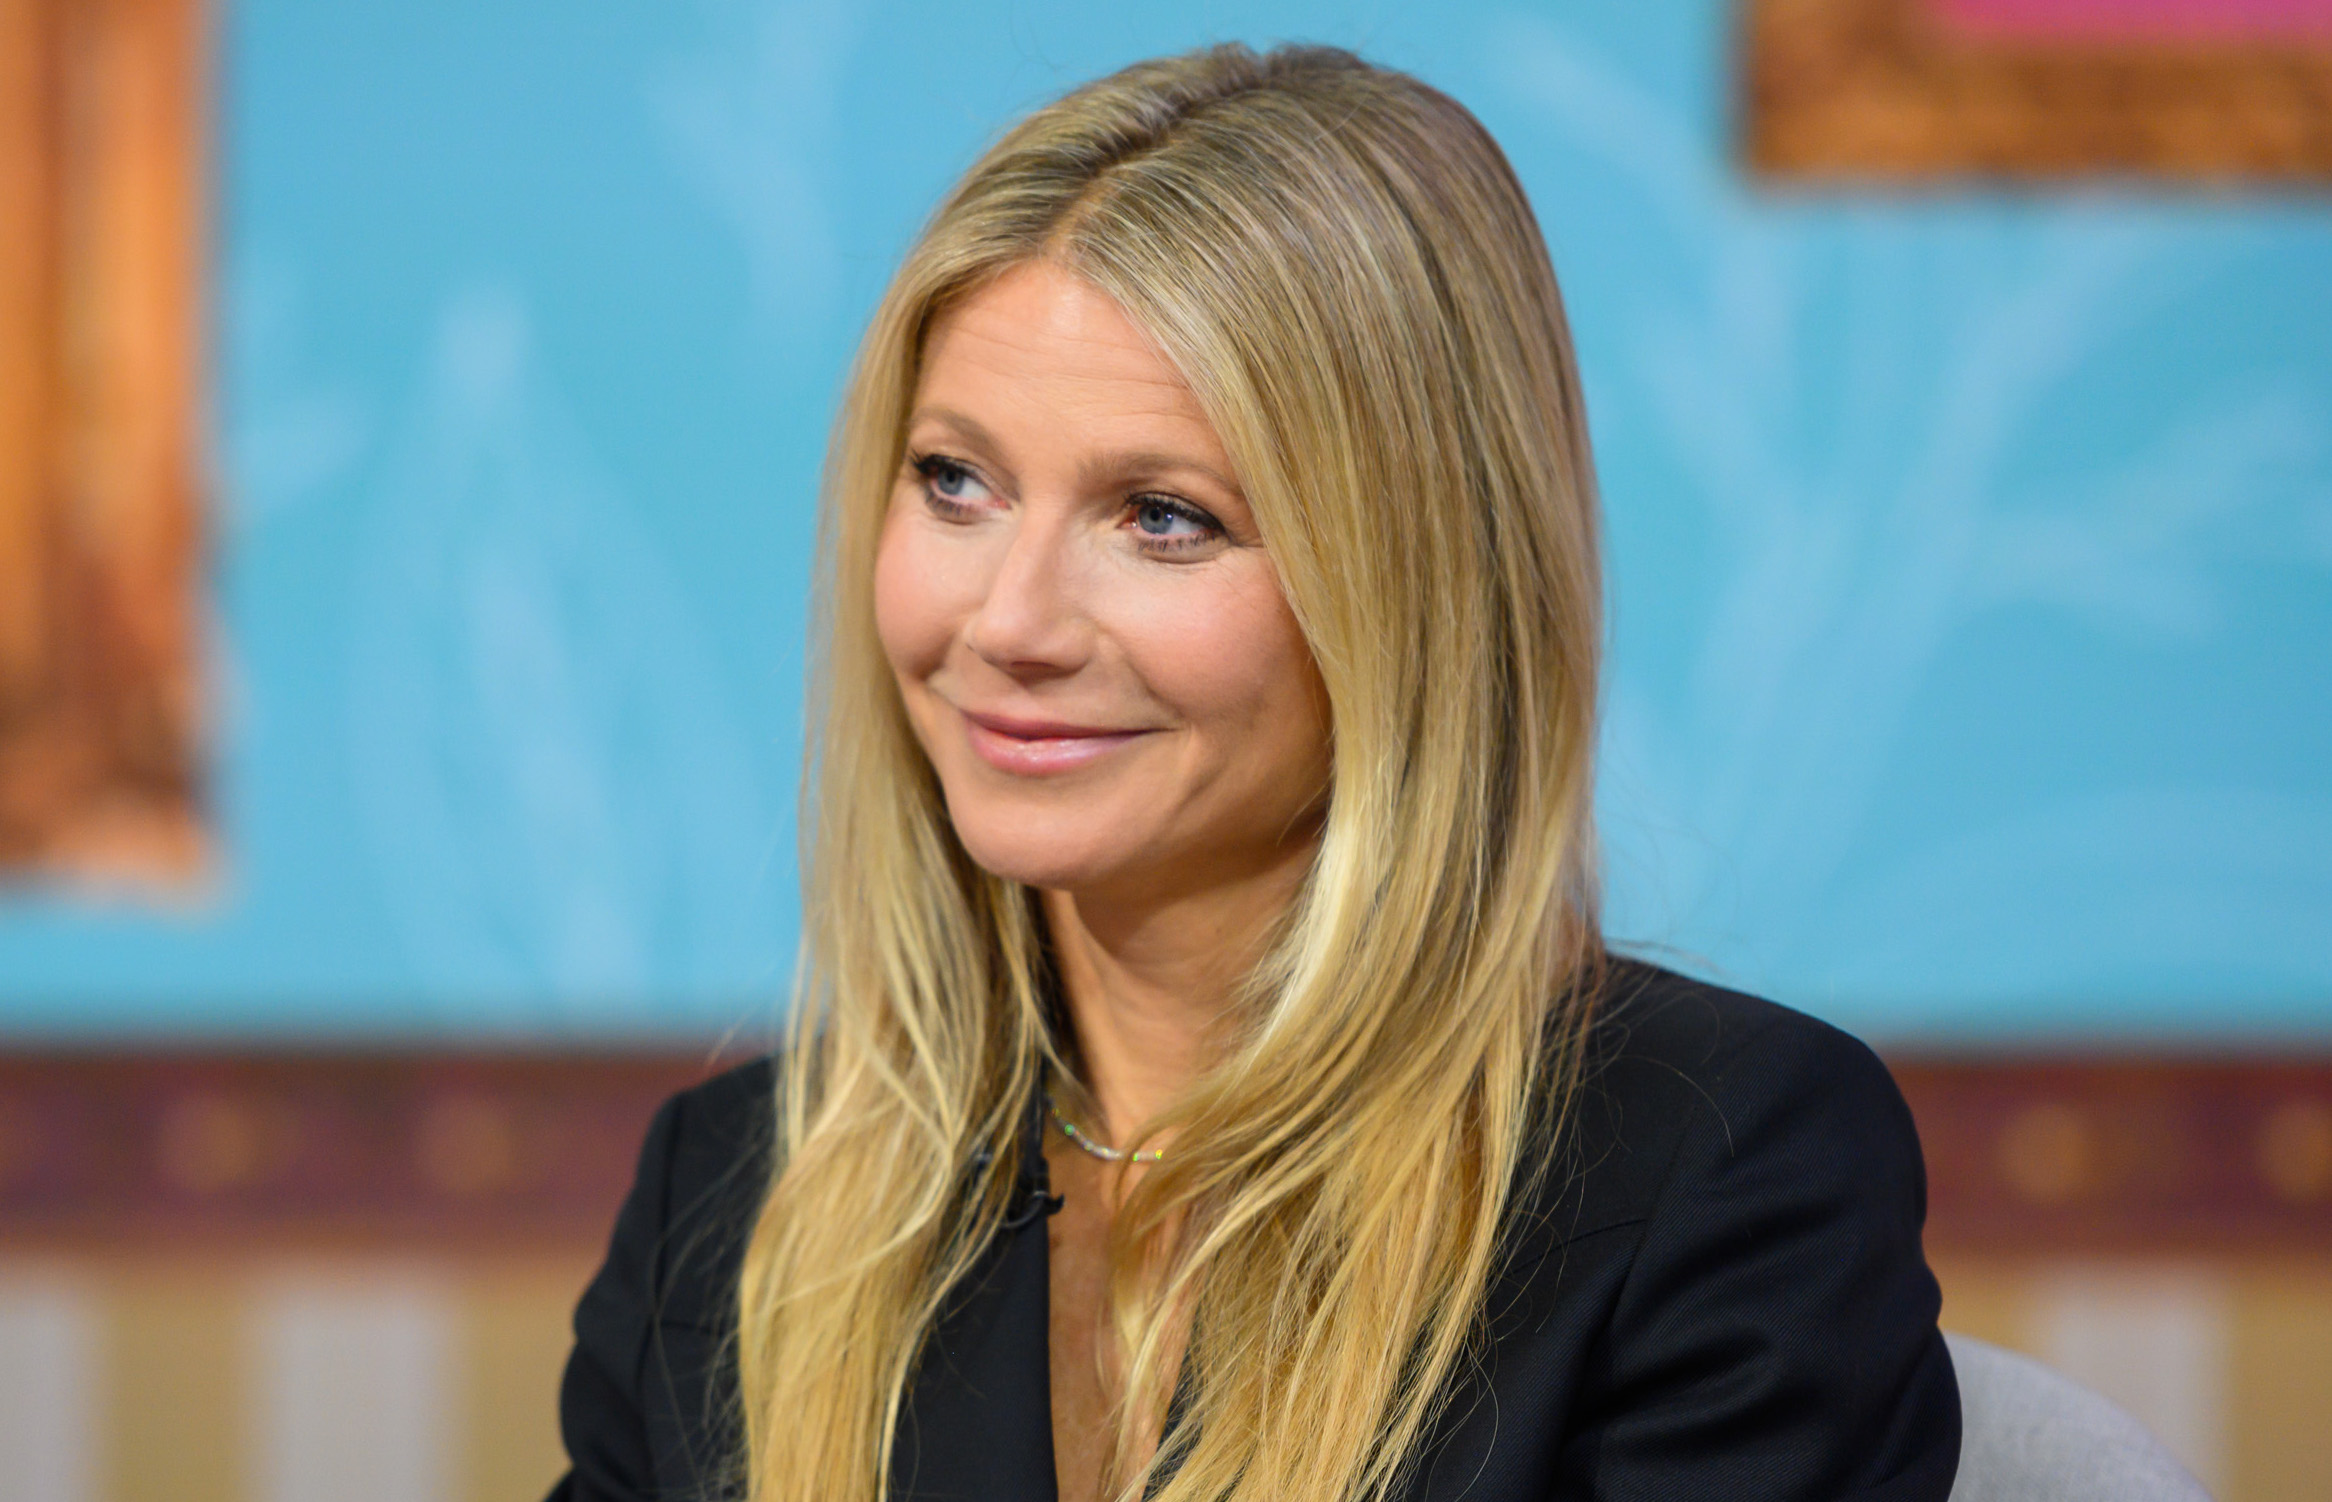 ‘Insufferable’: Gwyneth Paltrow Slammed After Sharing Daily Wellness Routine